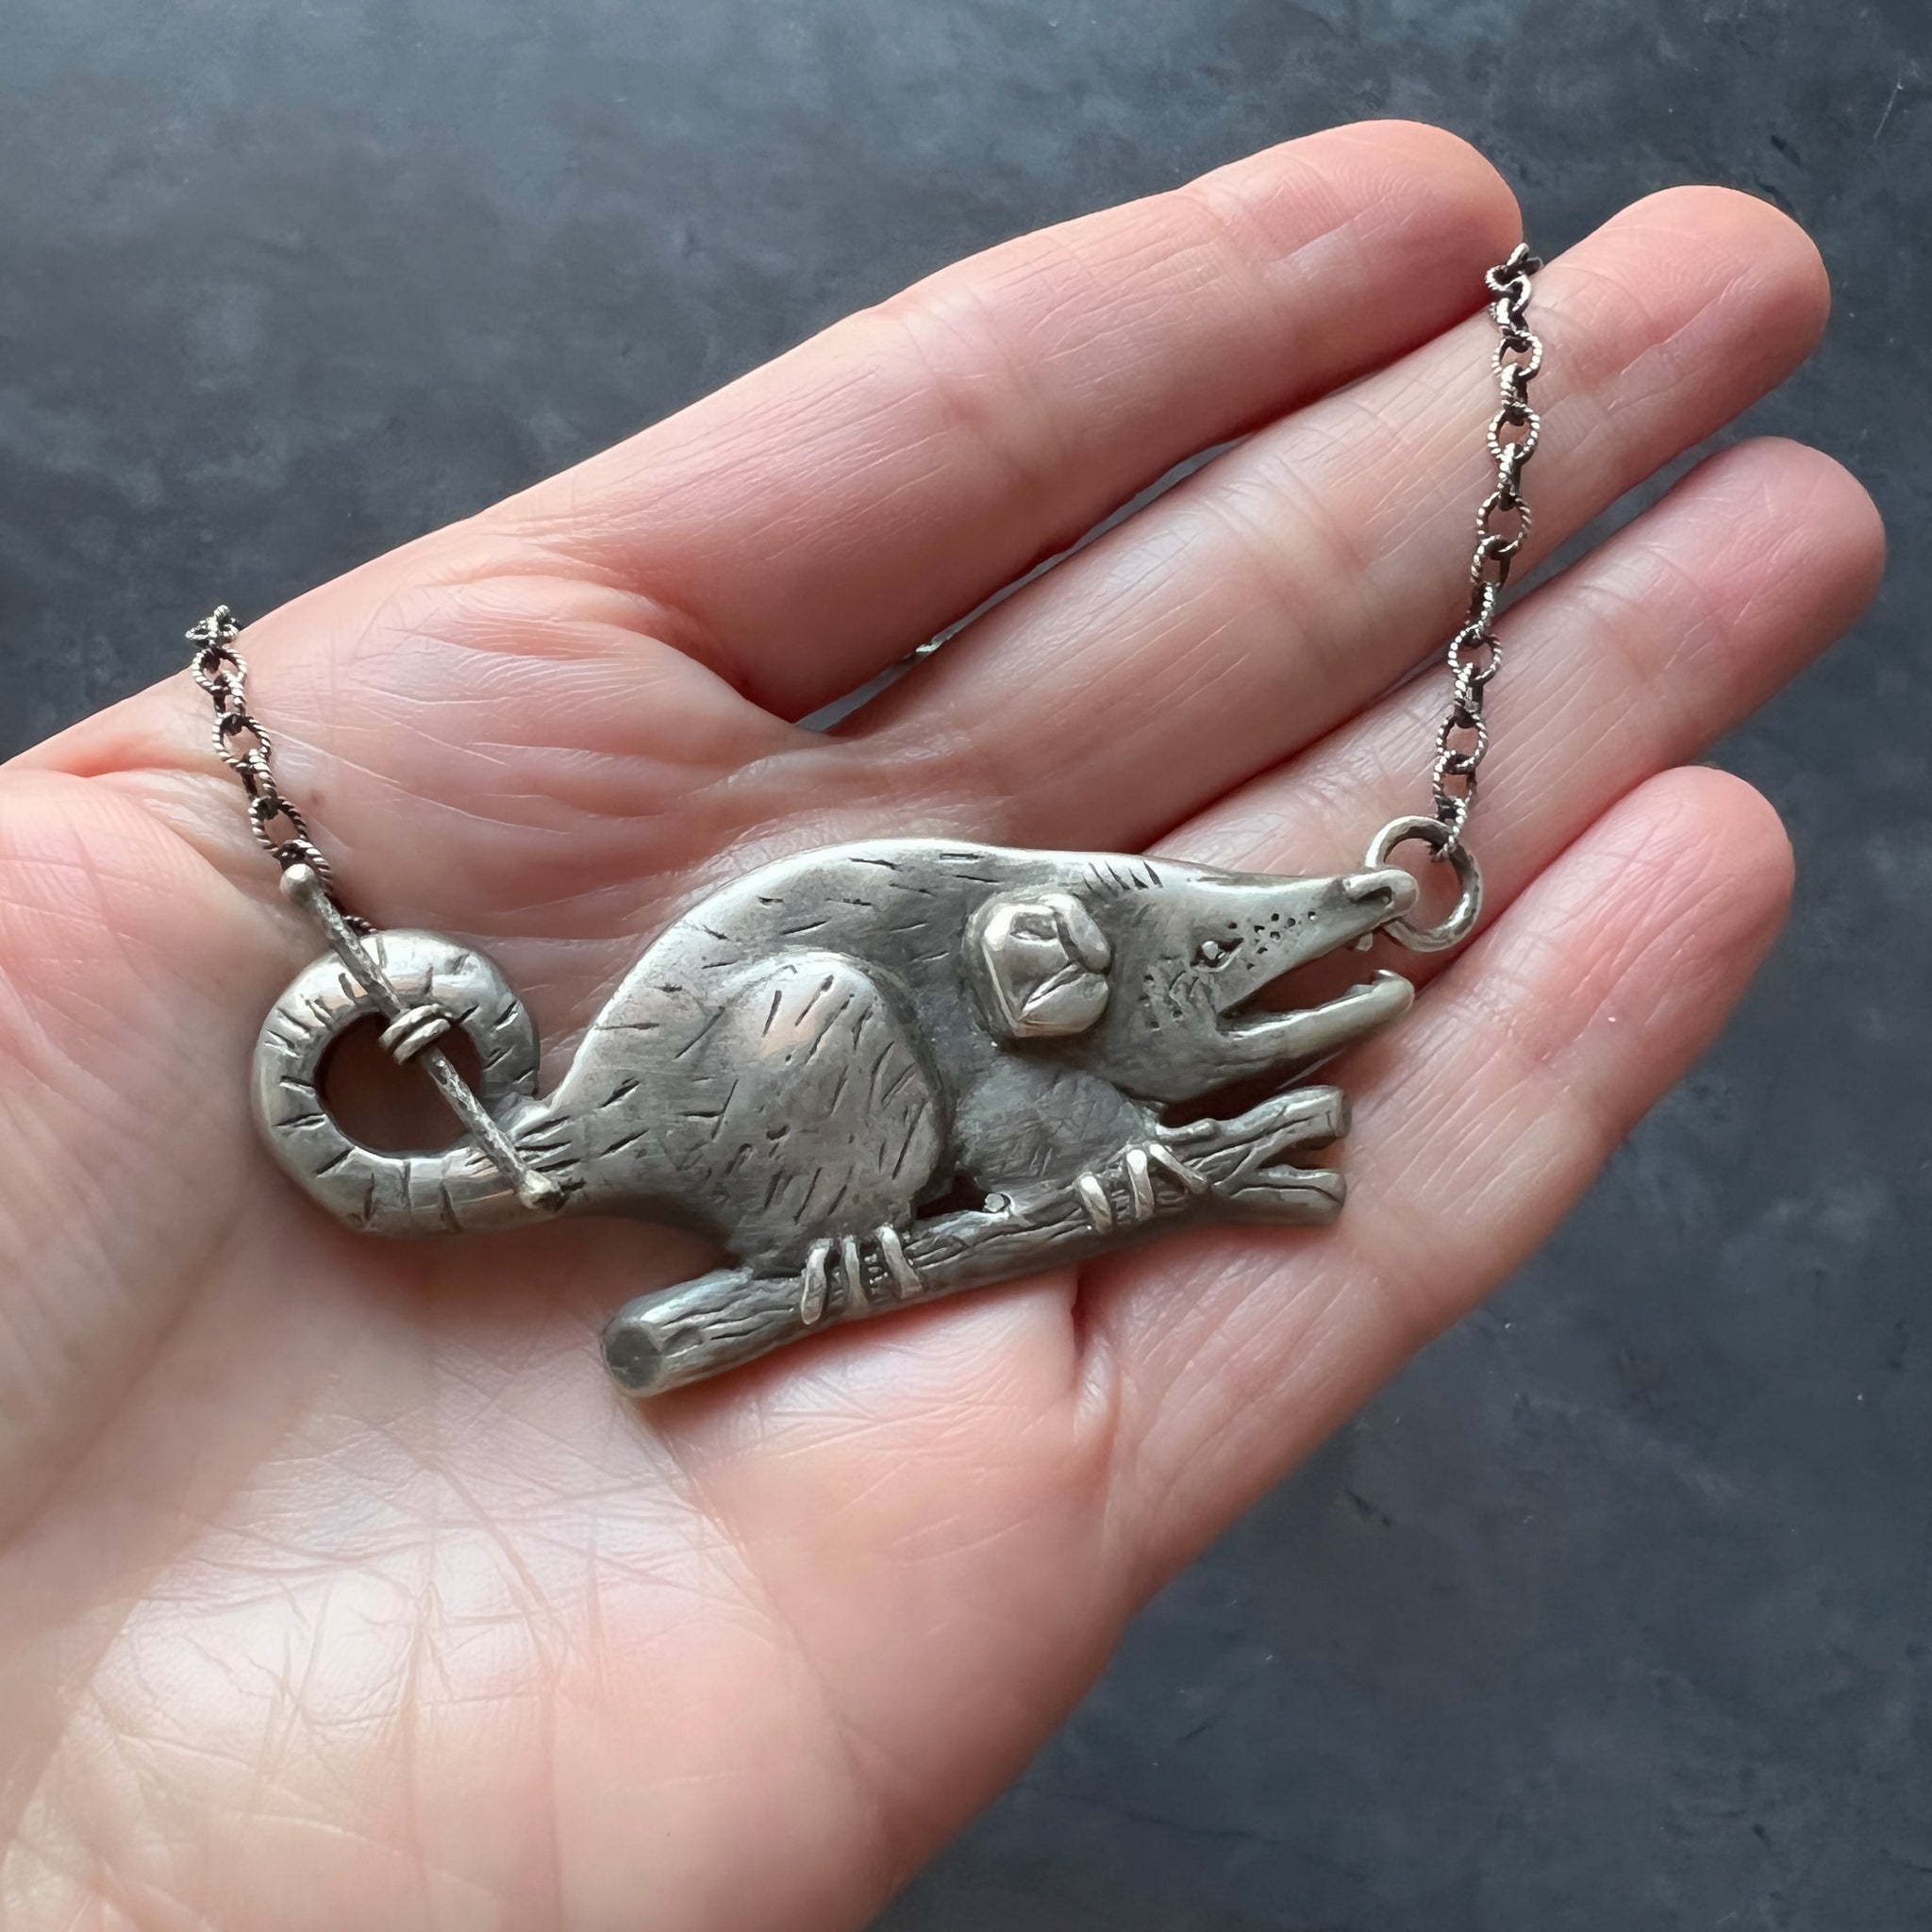 Made to Order Handcrafted Silver Hissing Opossum Statement Necklace with Toggle Closure